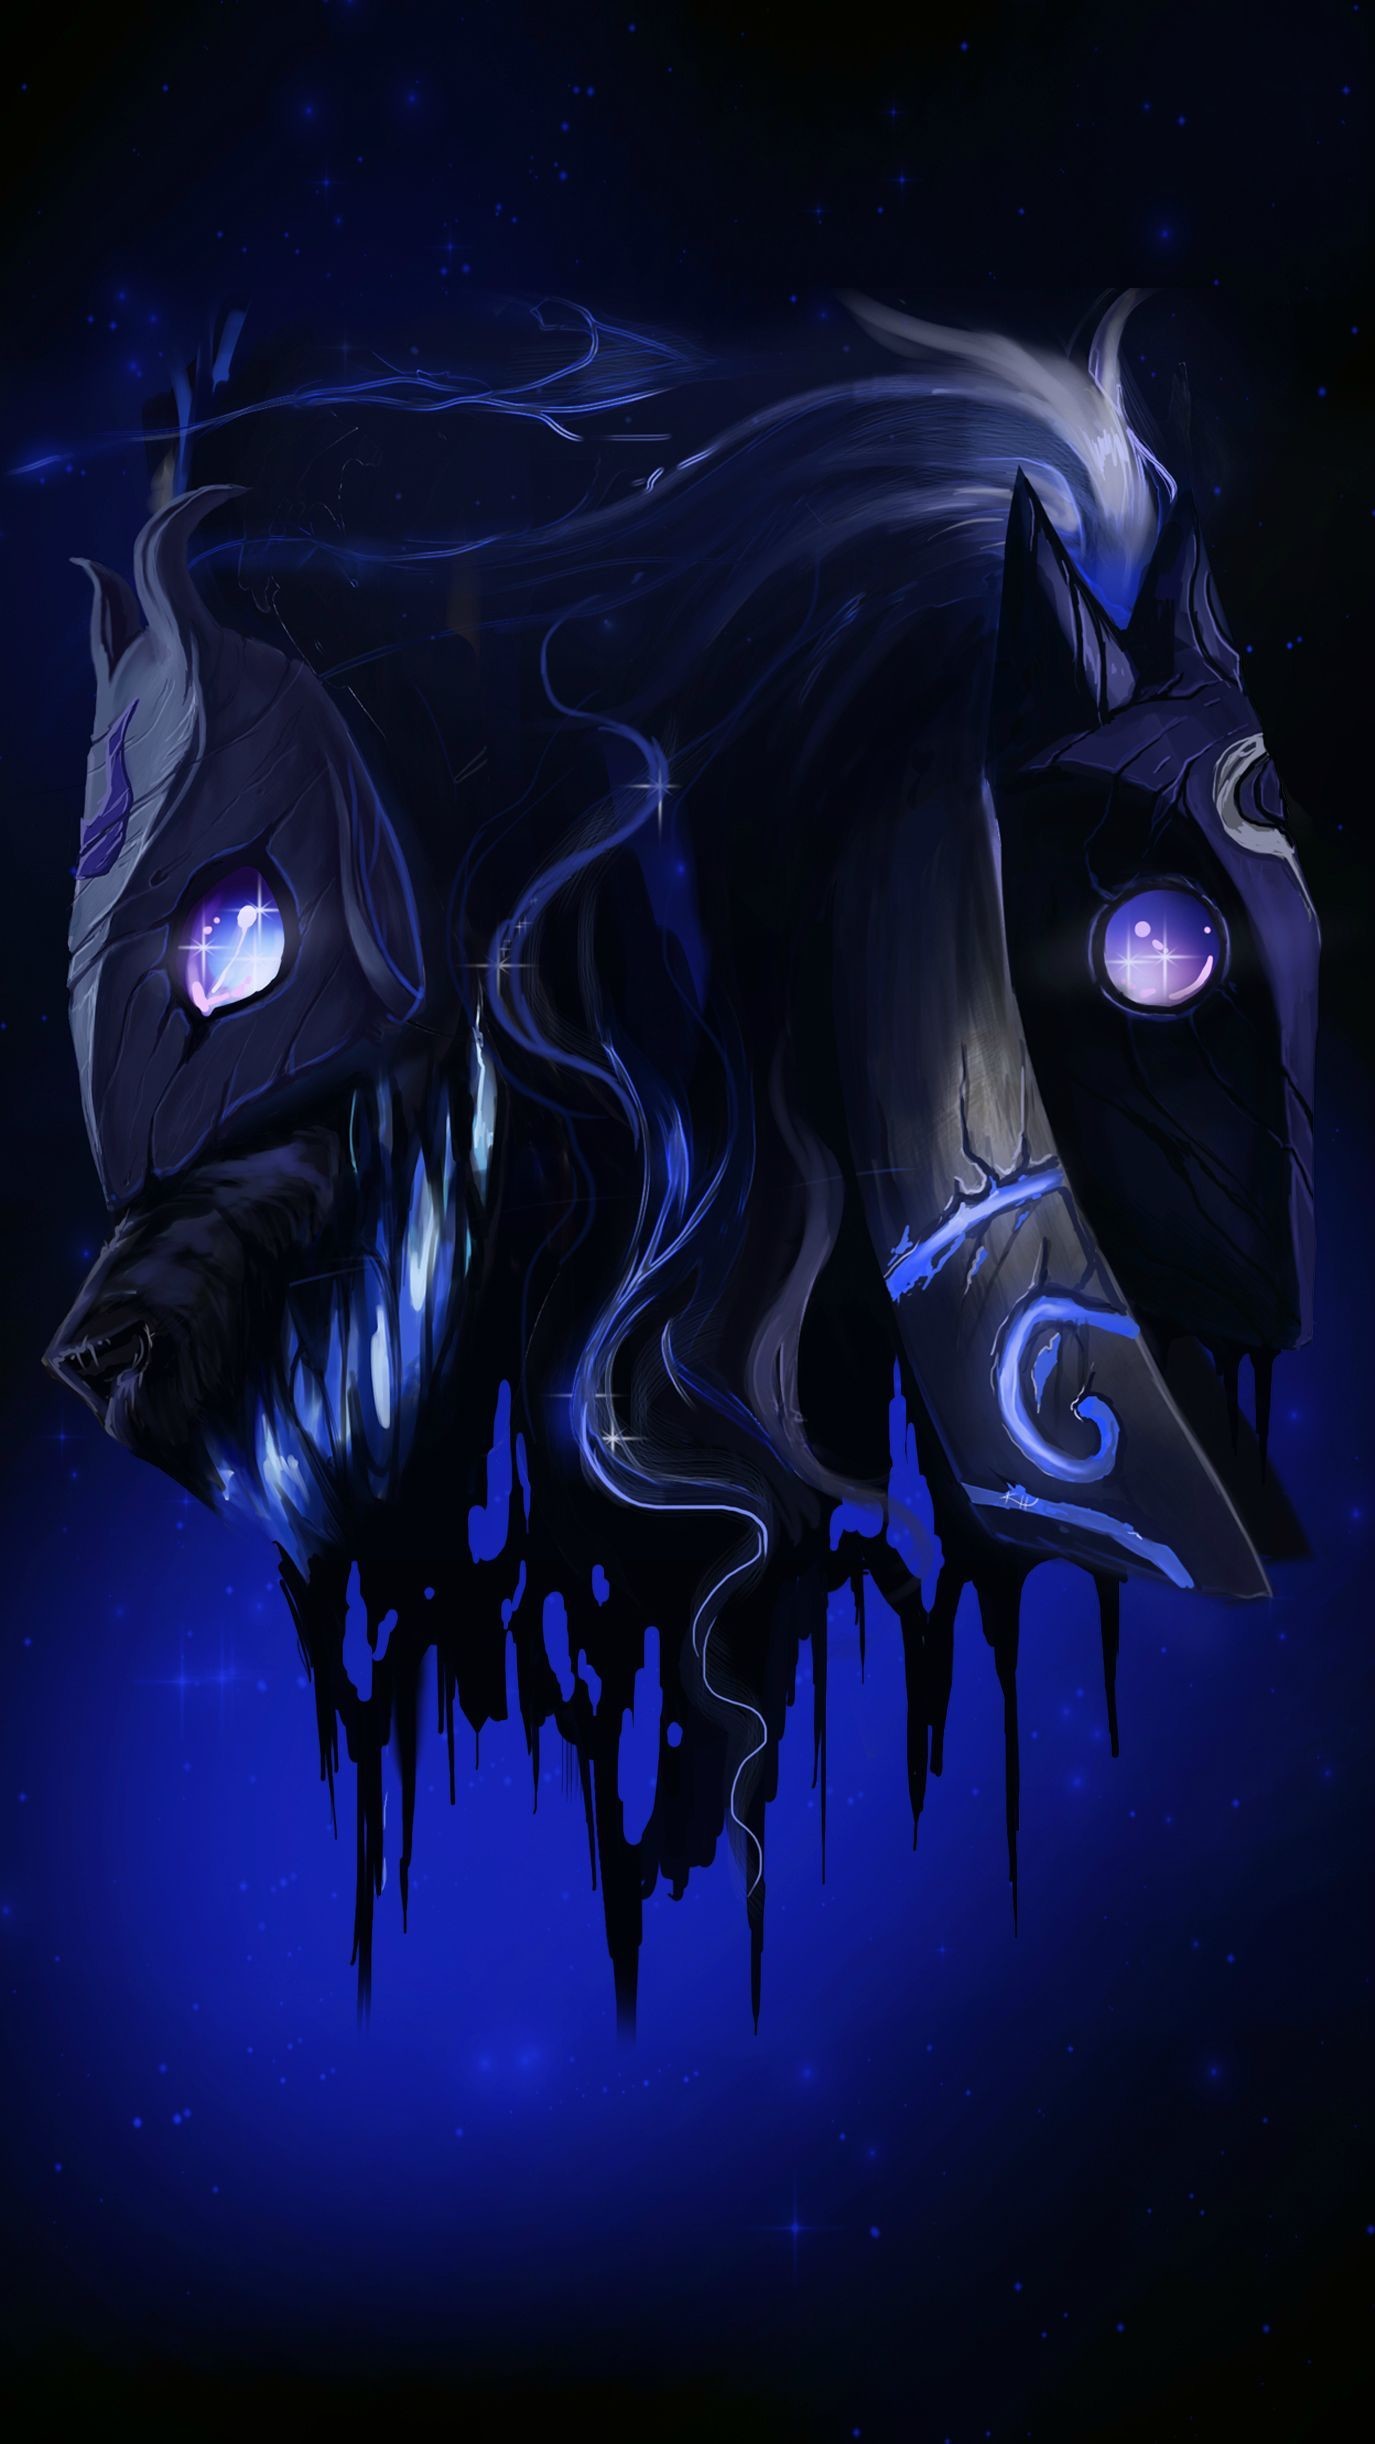 Free Download 82 Kindred Lol Wallpapers On Wallpaperplay 1375x2444 For Your Desktop Mobile Tablet Explore 53 Mobile Wallpapers League Legend Mobile Wallpapers League Legend League Of Legend Wallpaper Mobile Legend 2019 Wallpapers